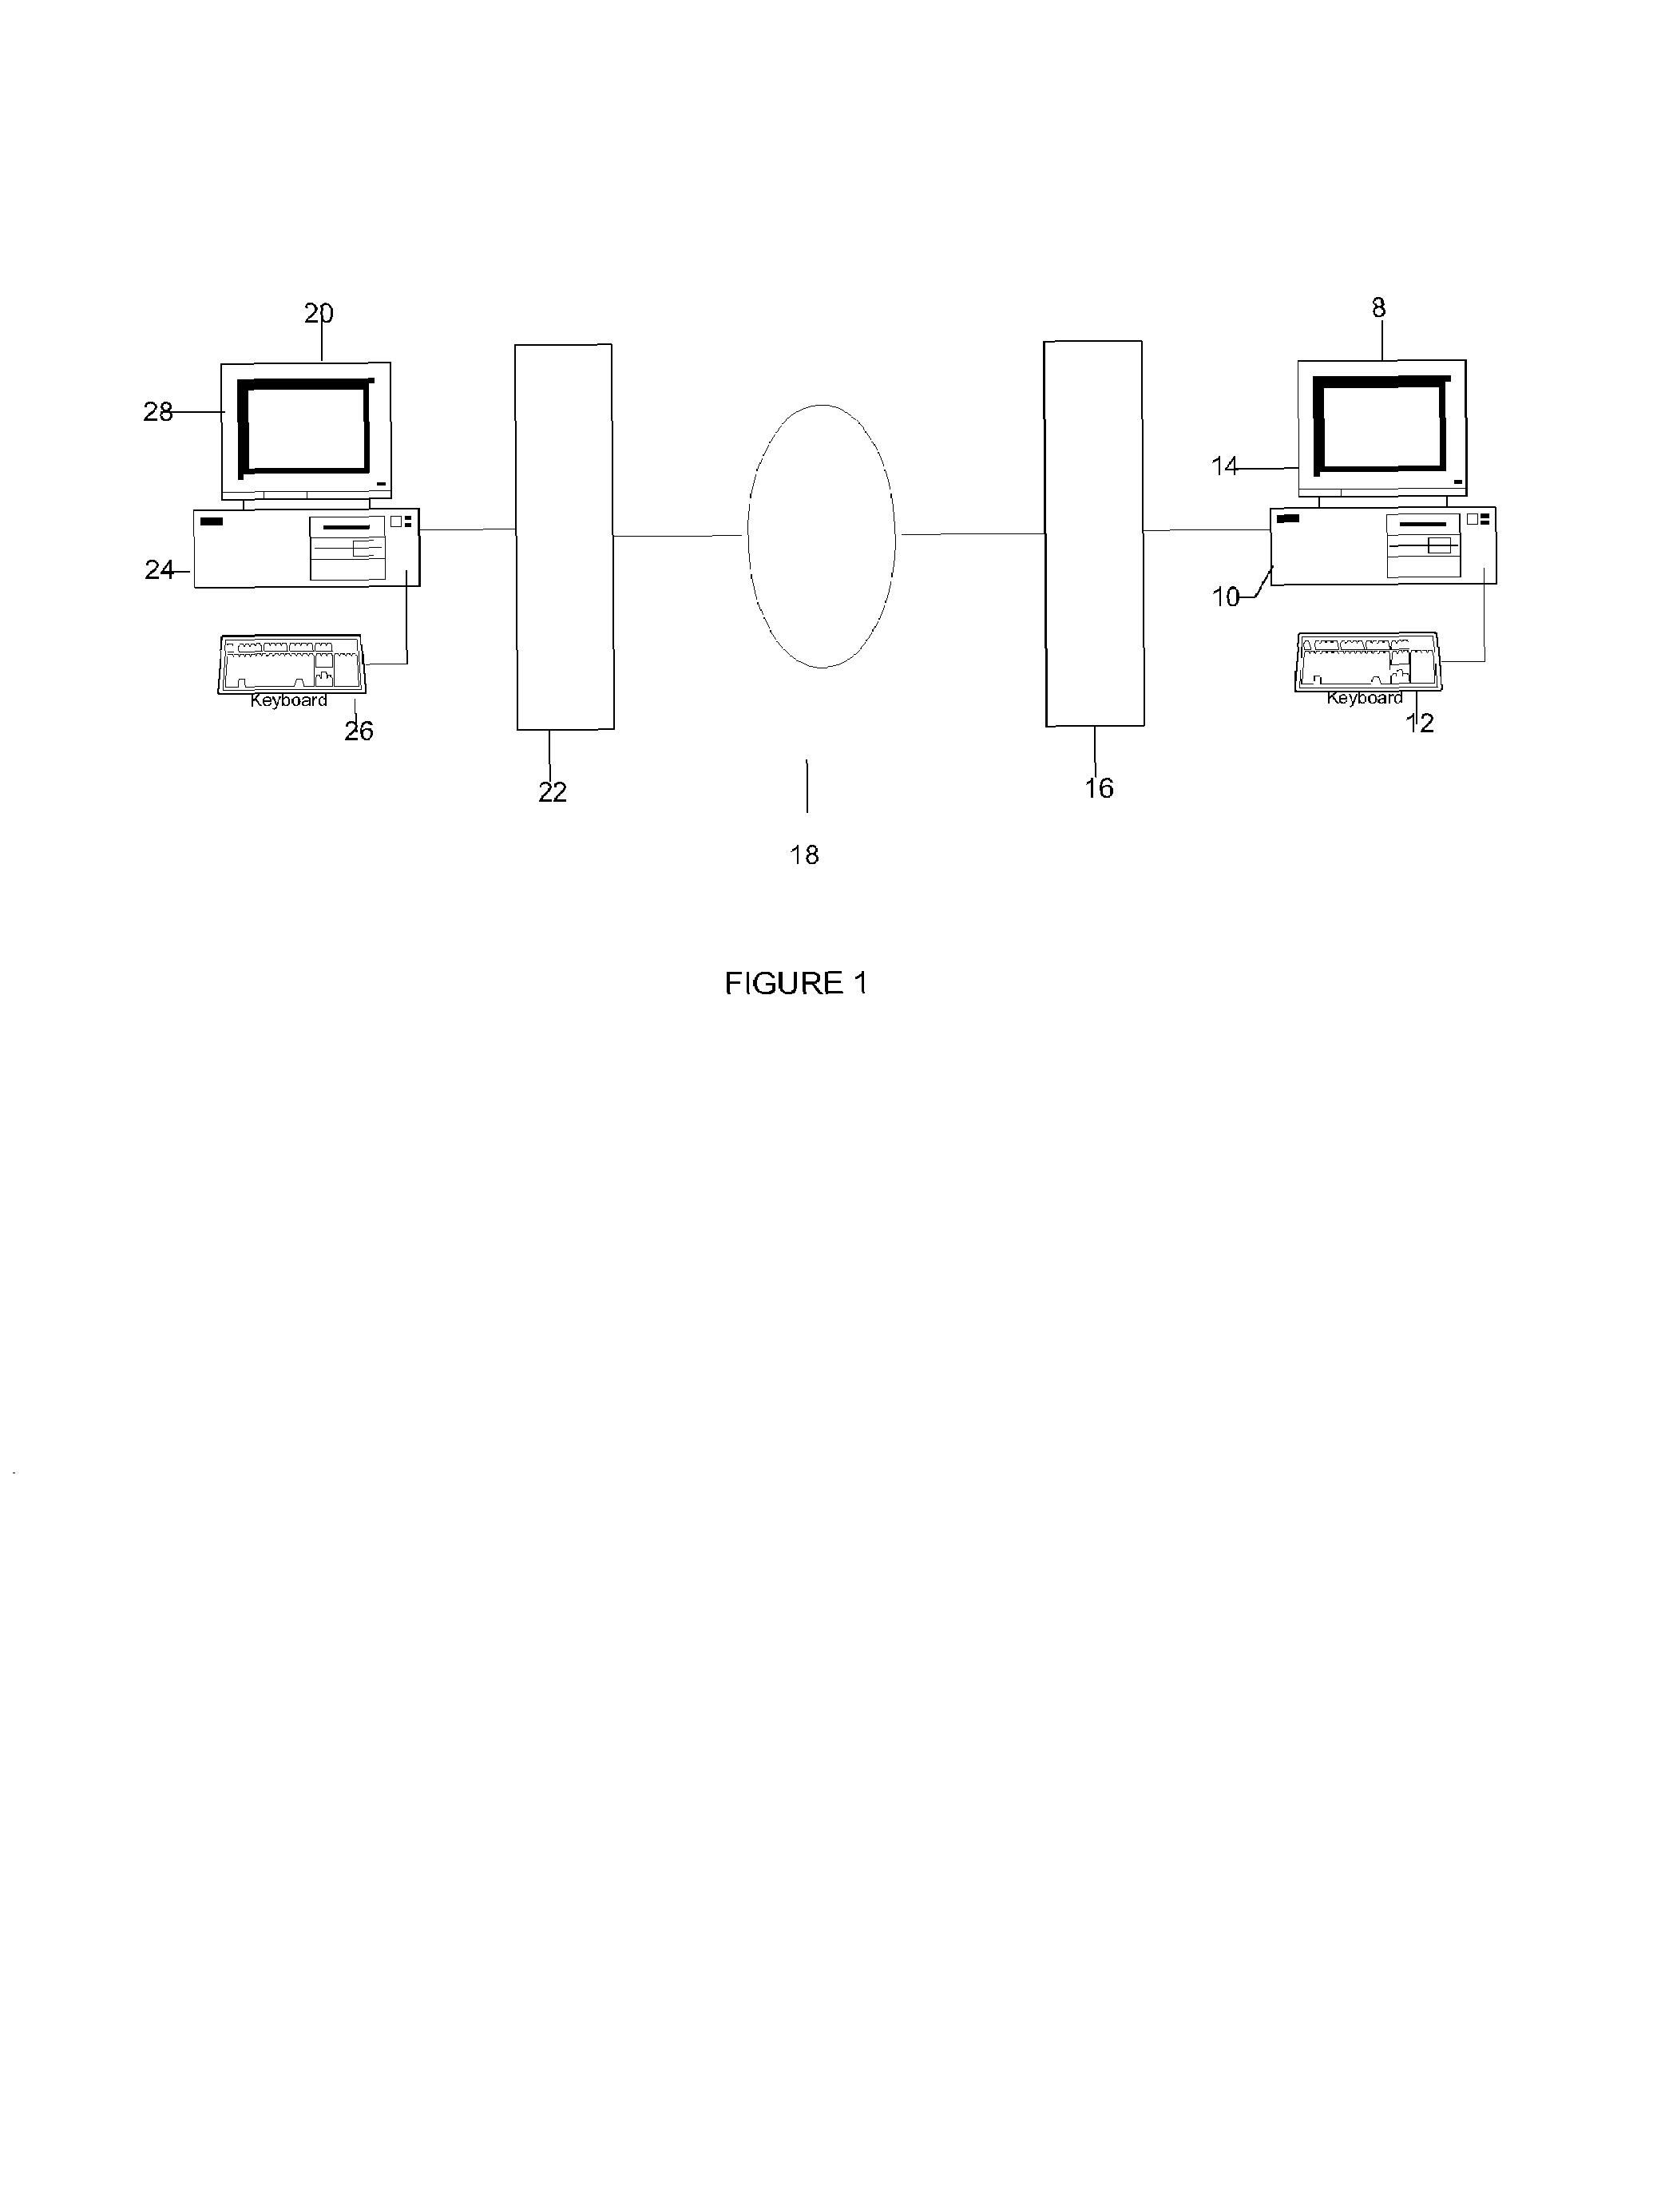 System for transmitting secure data between a sender and a recipient over a computer network using a virtual envelope and method for using the same